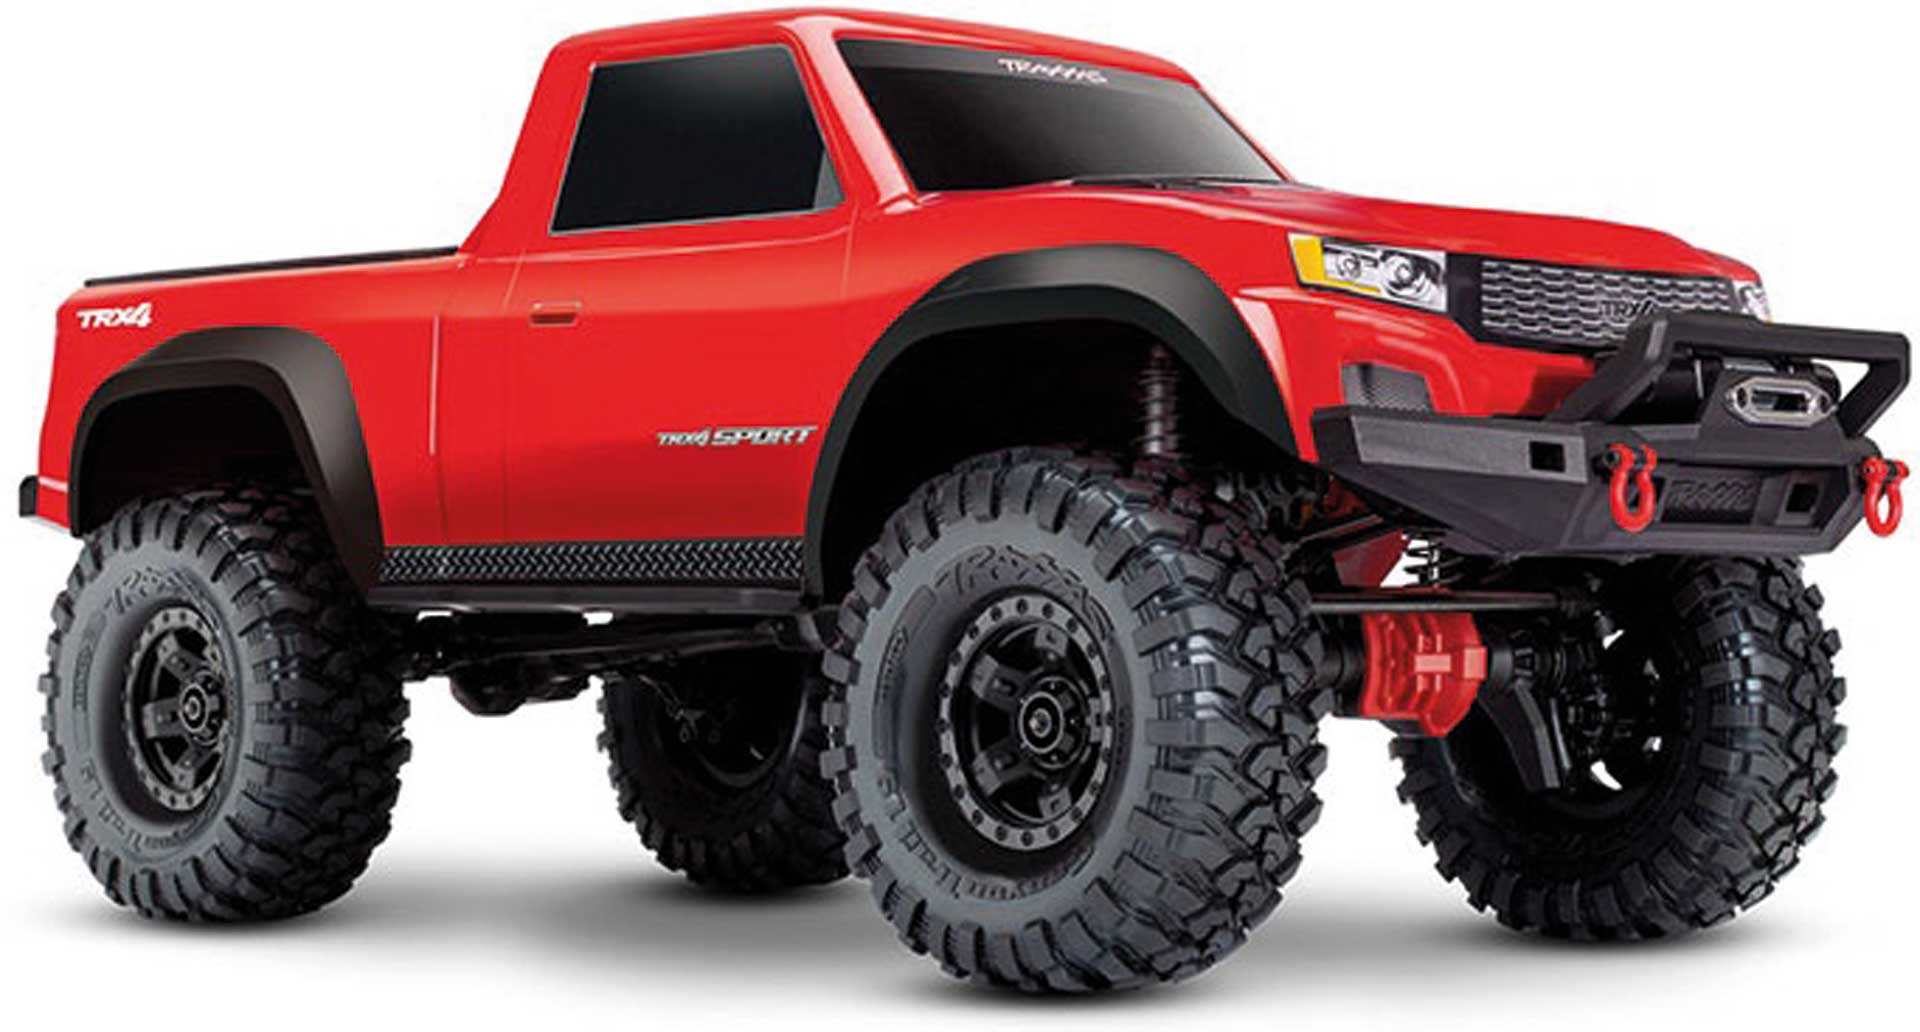 TRAXXAS TRX-4 SPORT 4X4 ROUGE SCALE-CRAWLER 1/10 RTR BRUSHED, CLIPLESS, SANS BATTERIE NI CHARGEUR